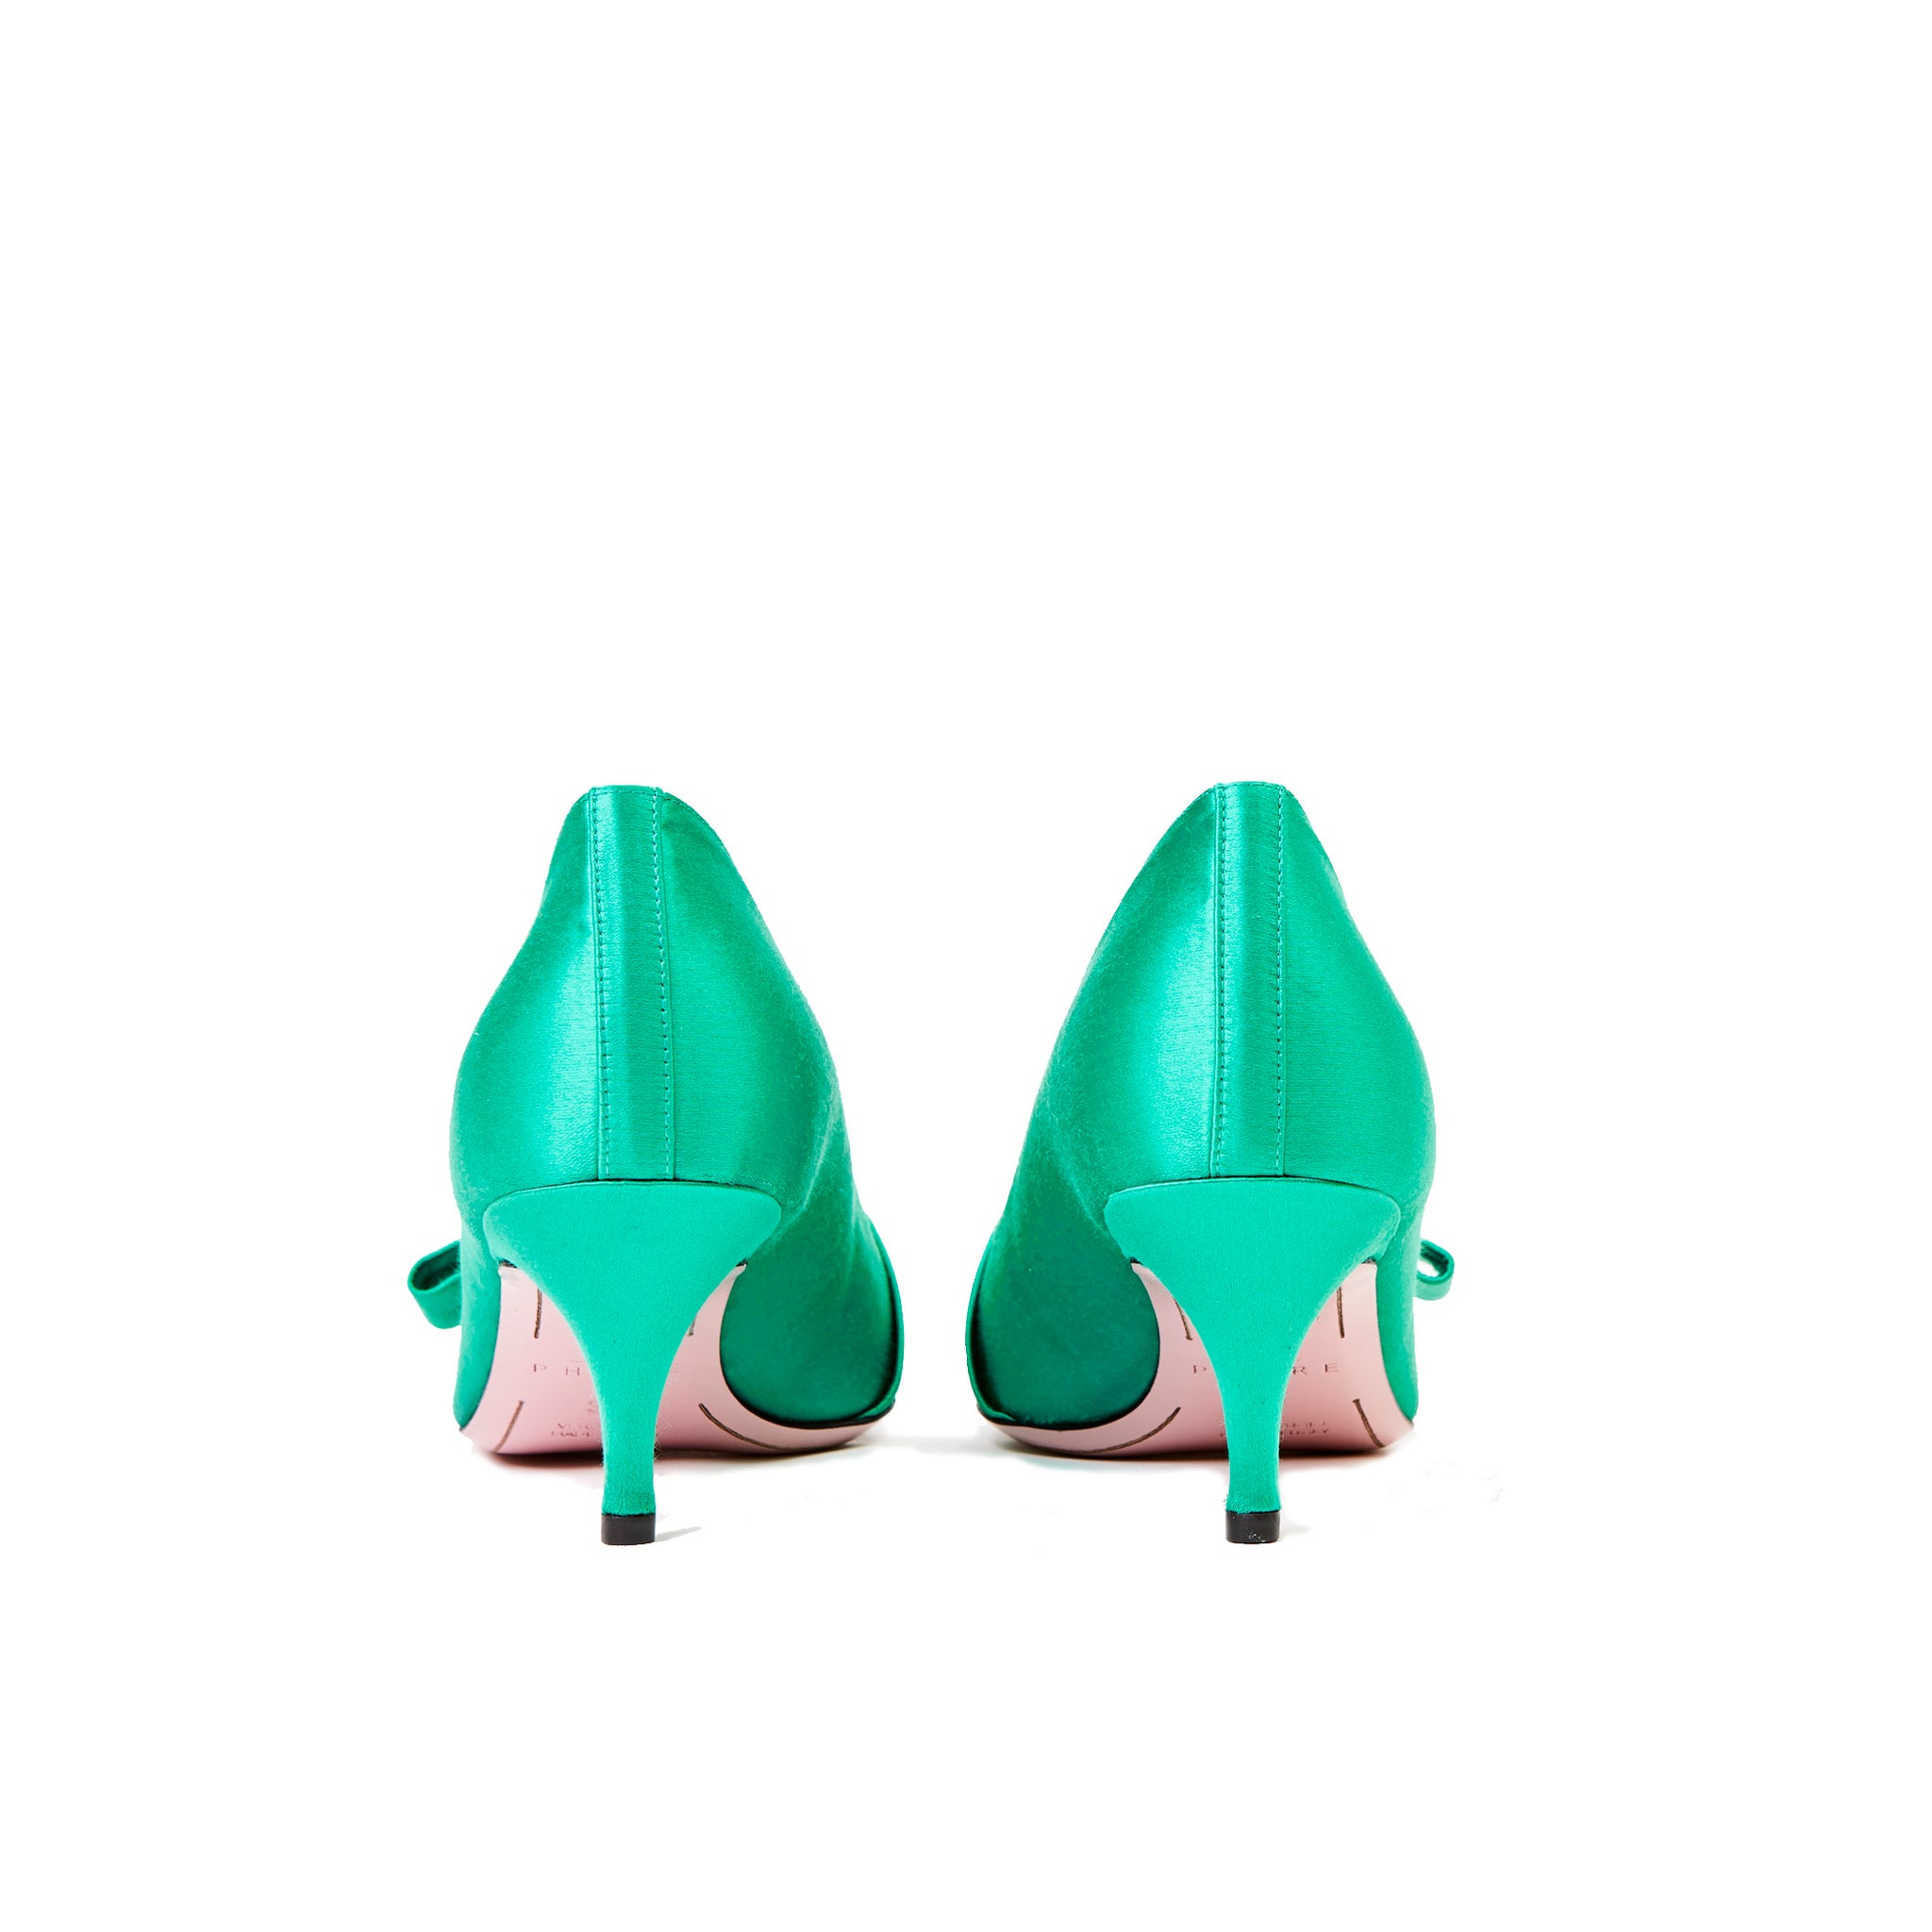 Phare studded kitten heel in verde silk satin with black and gold studs back view 